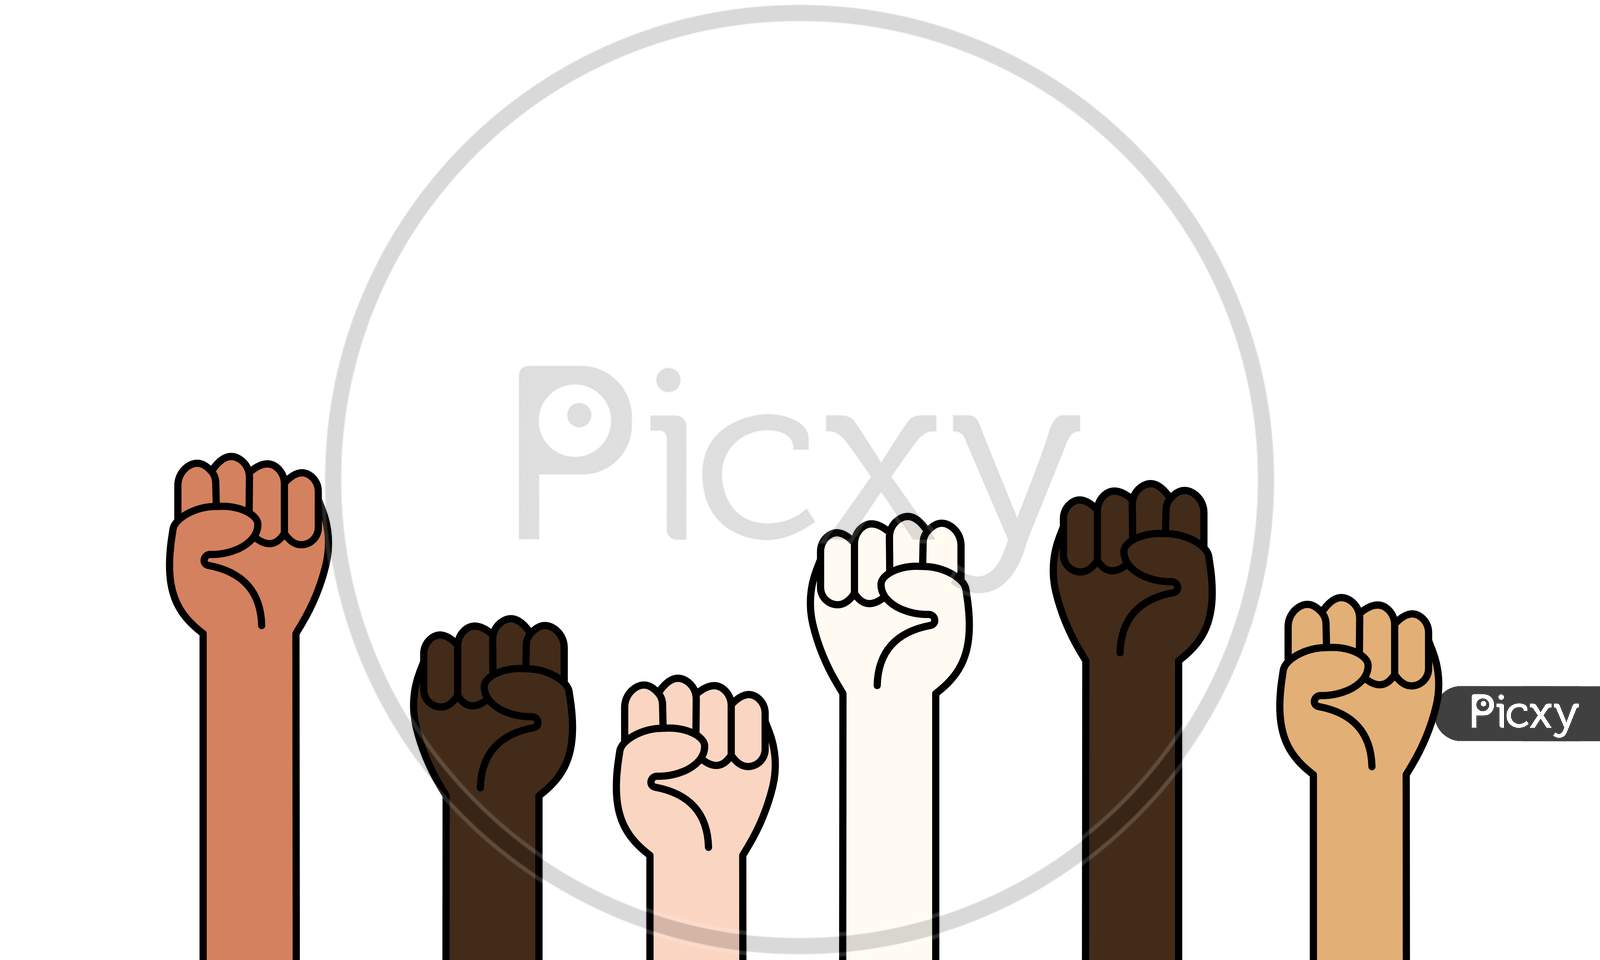 Fists In The Air Protest Symbol Flat Icon On White Background